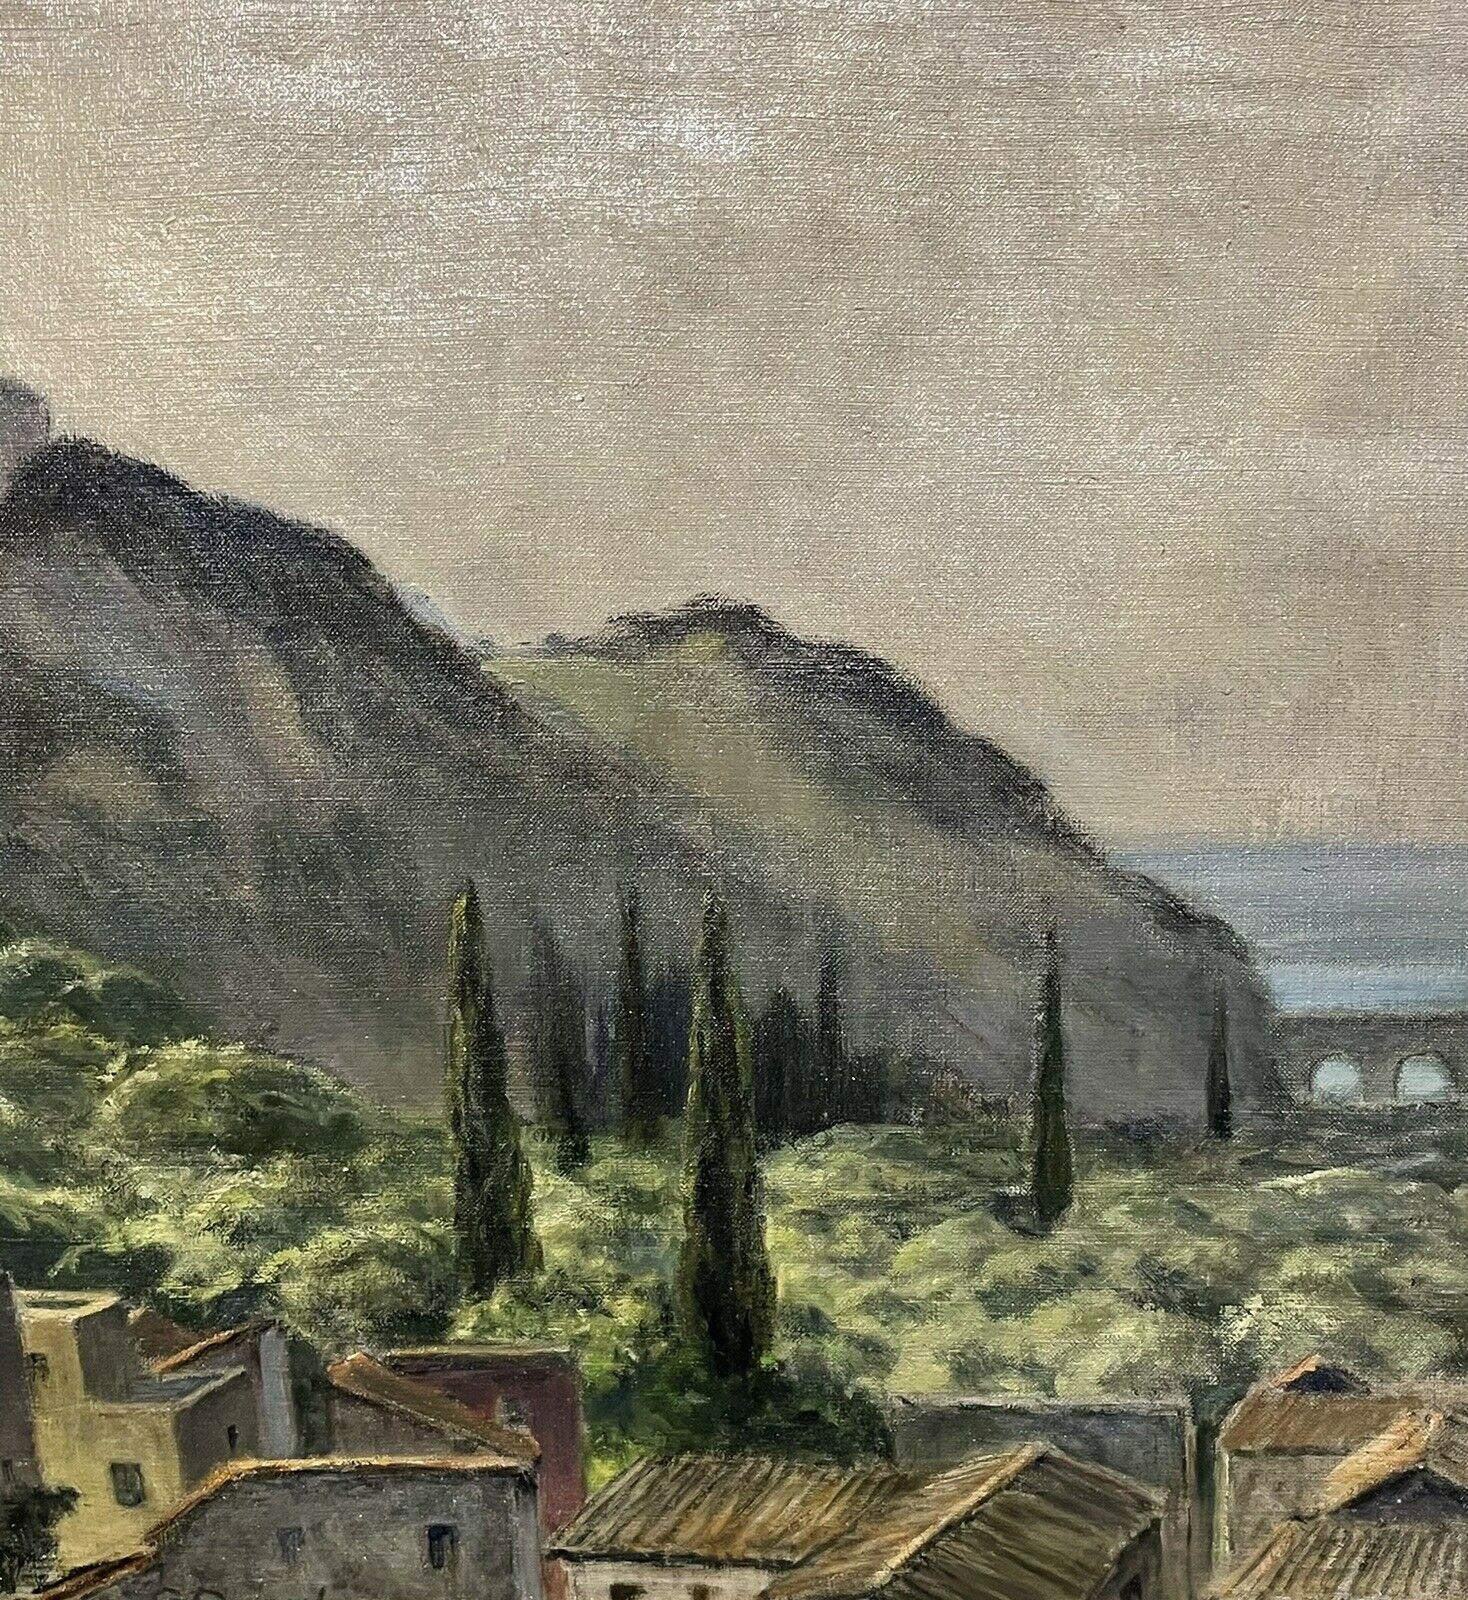 Artist/ School: G. Raoul, French mid 20th century, signed

Title: Hazy Provencal landscape, beautiful shades of muted green colors. 

Medium: signed oil painting on canvas, framed.

framed: 22 x 25.5 inches
canvas: 18 x 21.5 inches

Provenance: